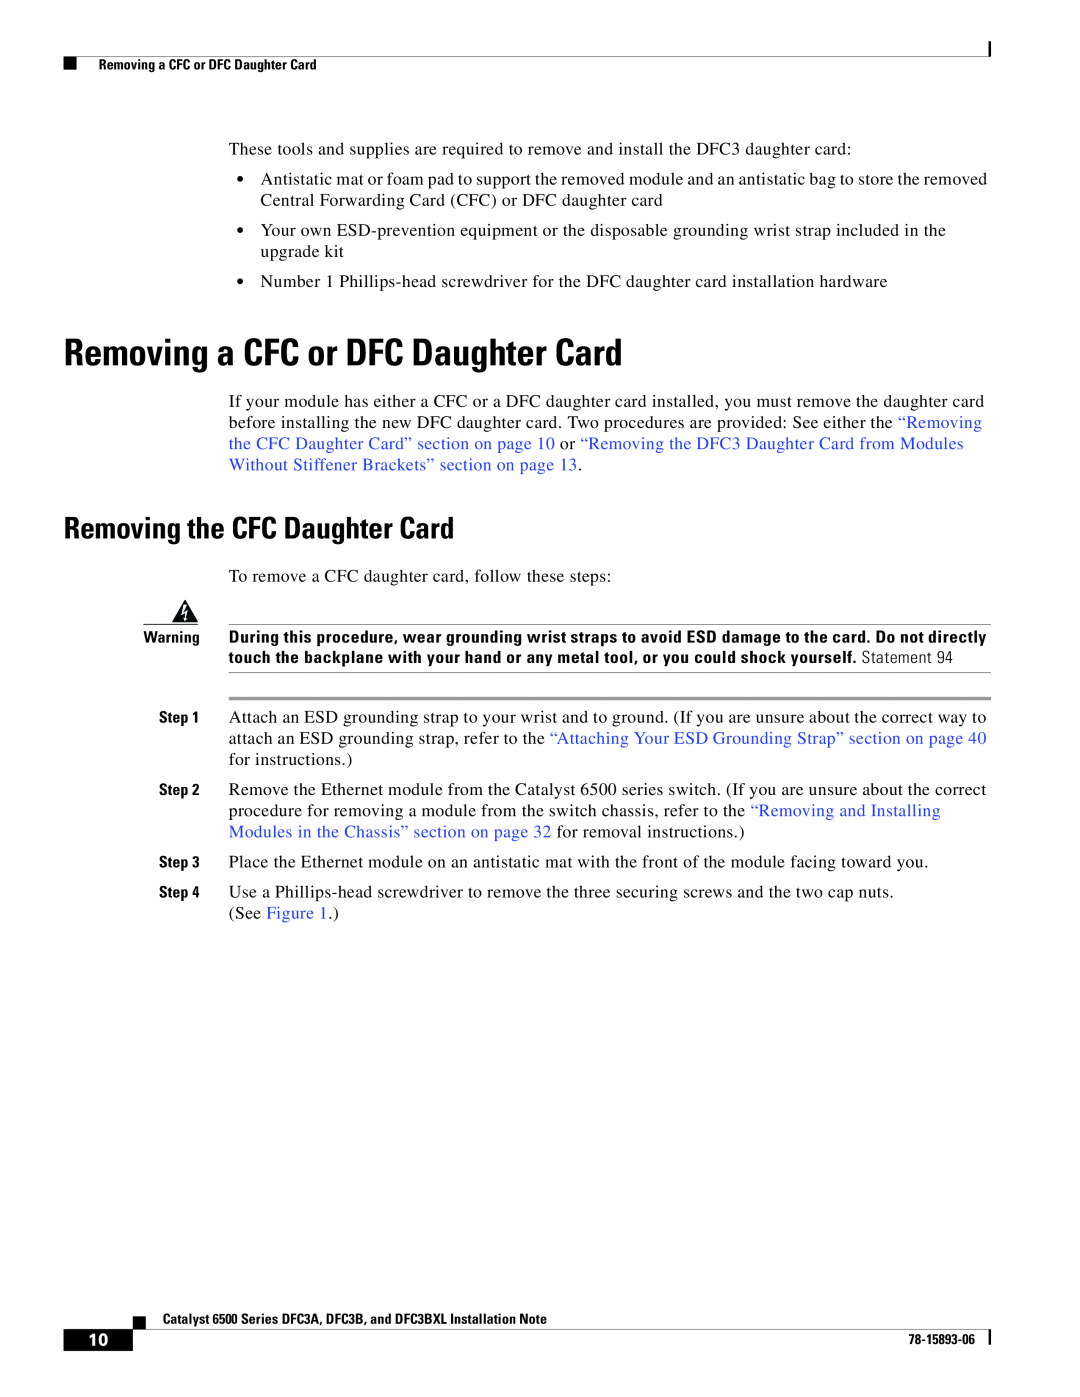 Cisco Systems DFC3BXL, DFC3A manual Removing a CFC or DFC Daughter Card, Removing the CFC Daughter Card 